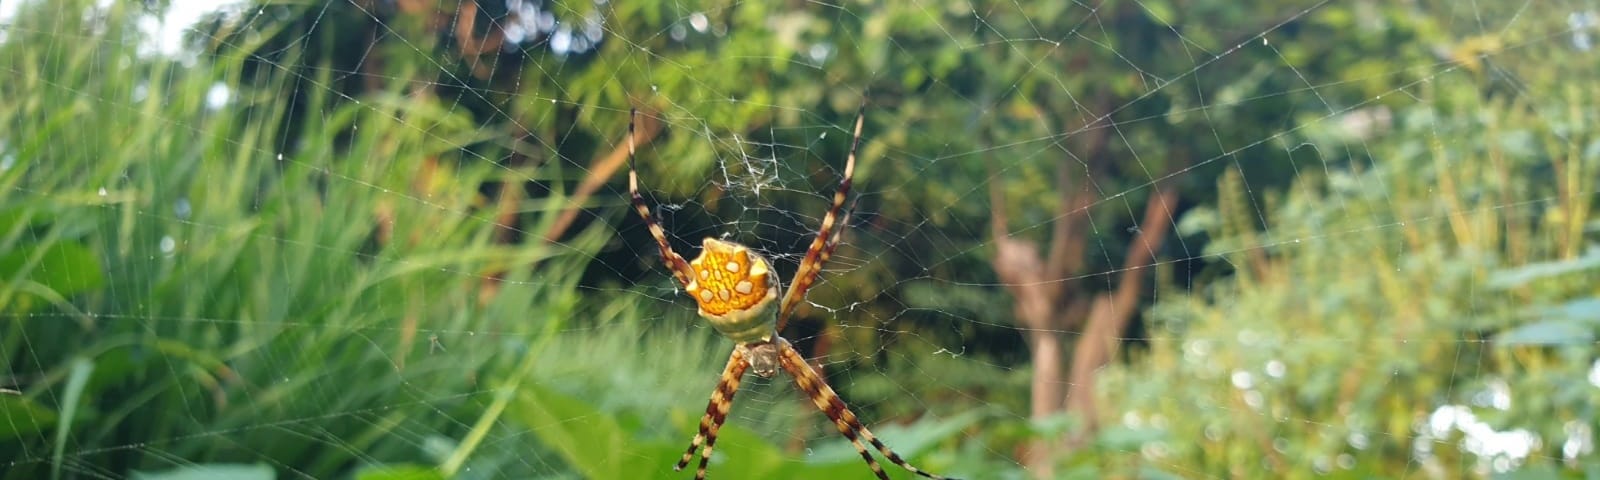 a spider’s web with a large golden brown spider inside